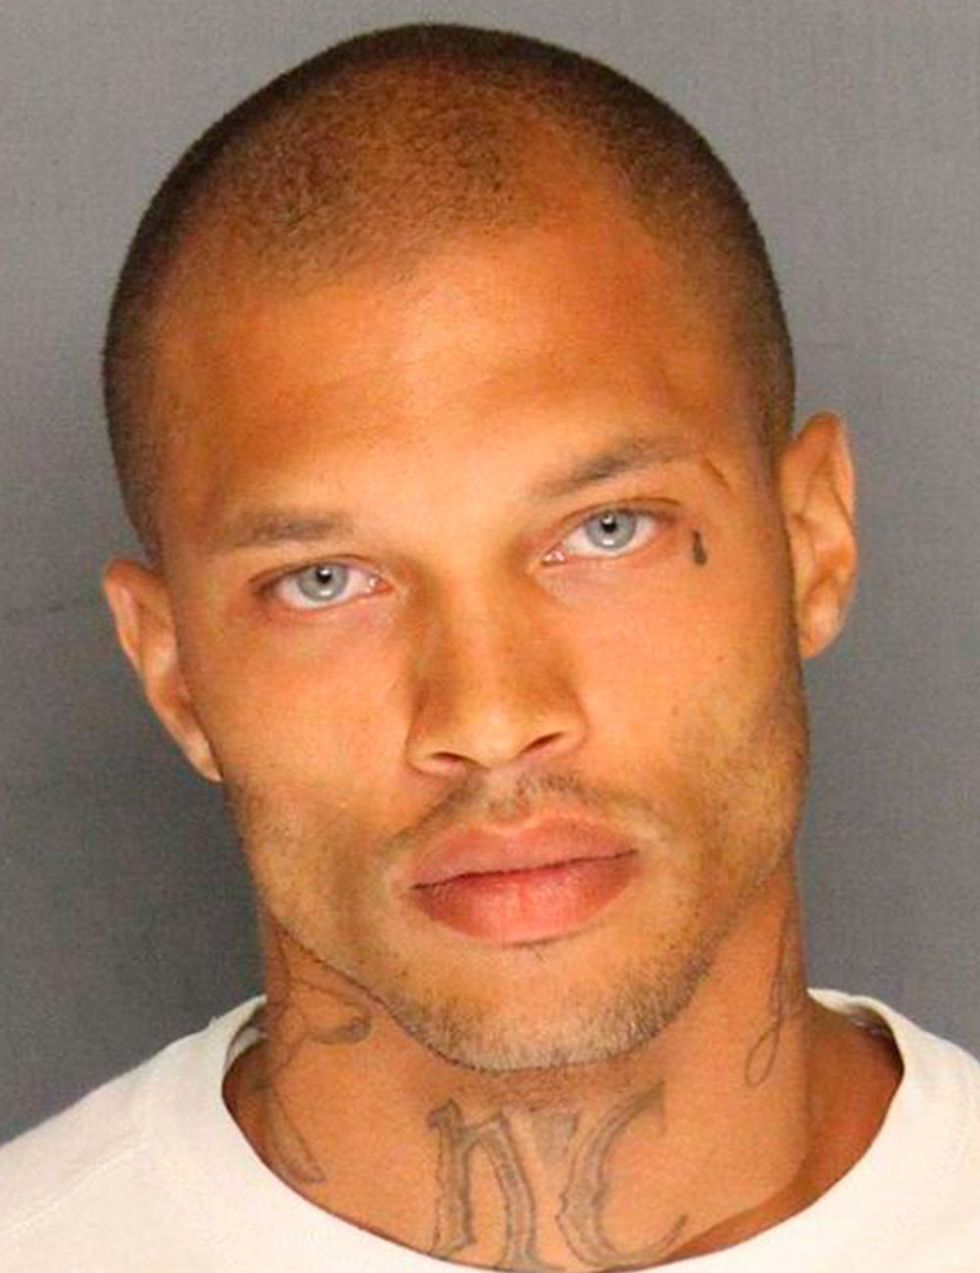 Hot Mugshot Guy Jeremy Meeks was totally a thing